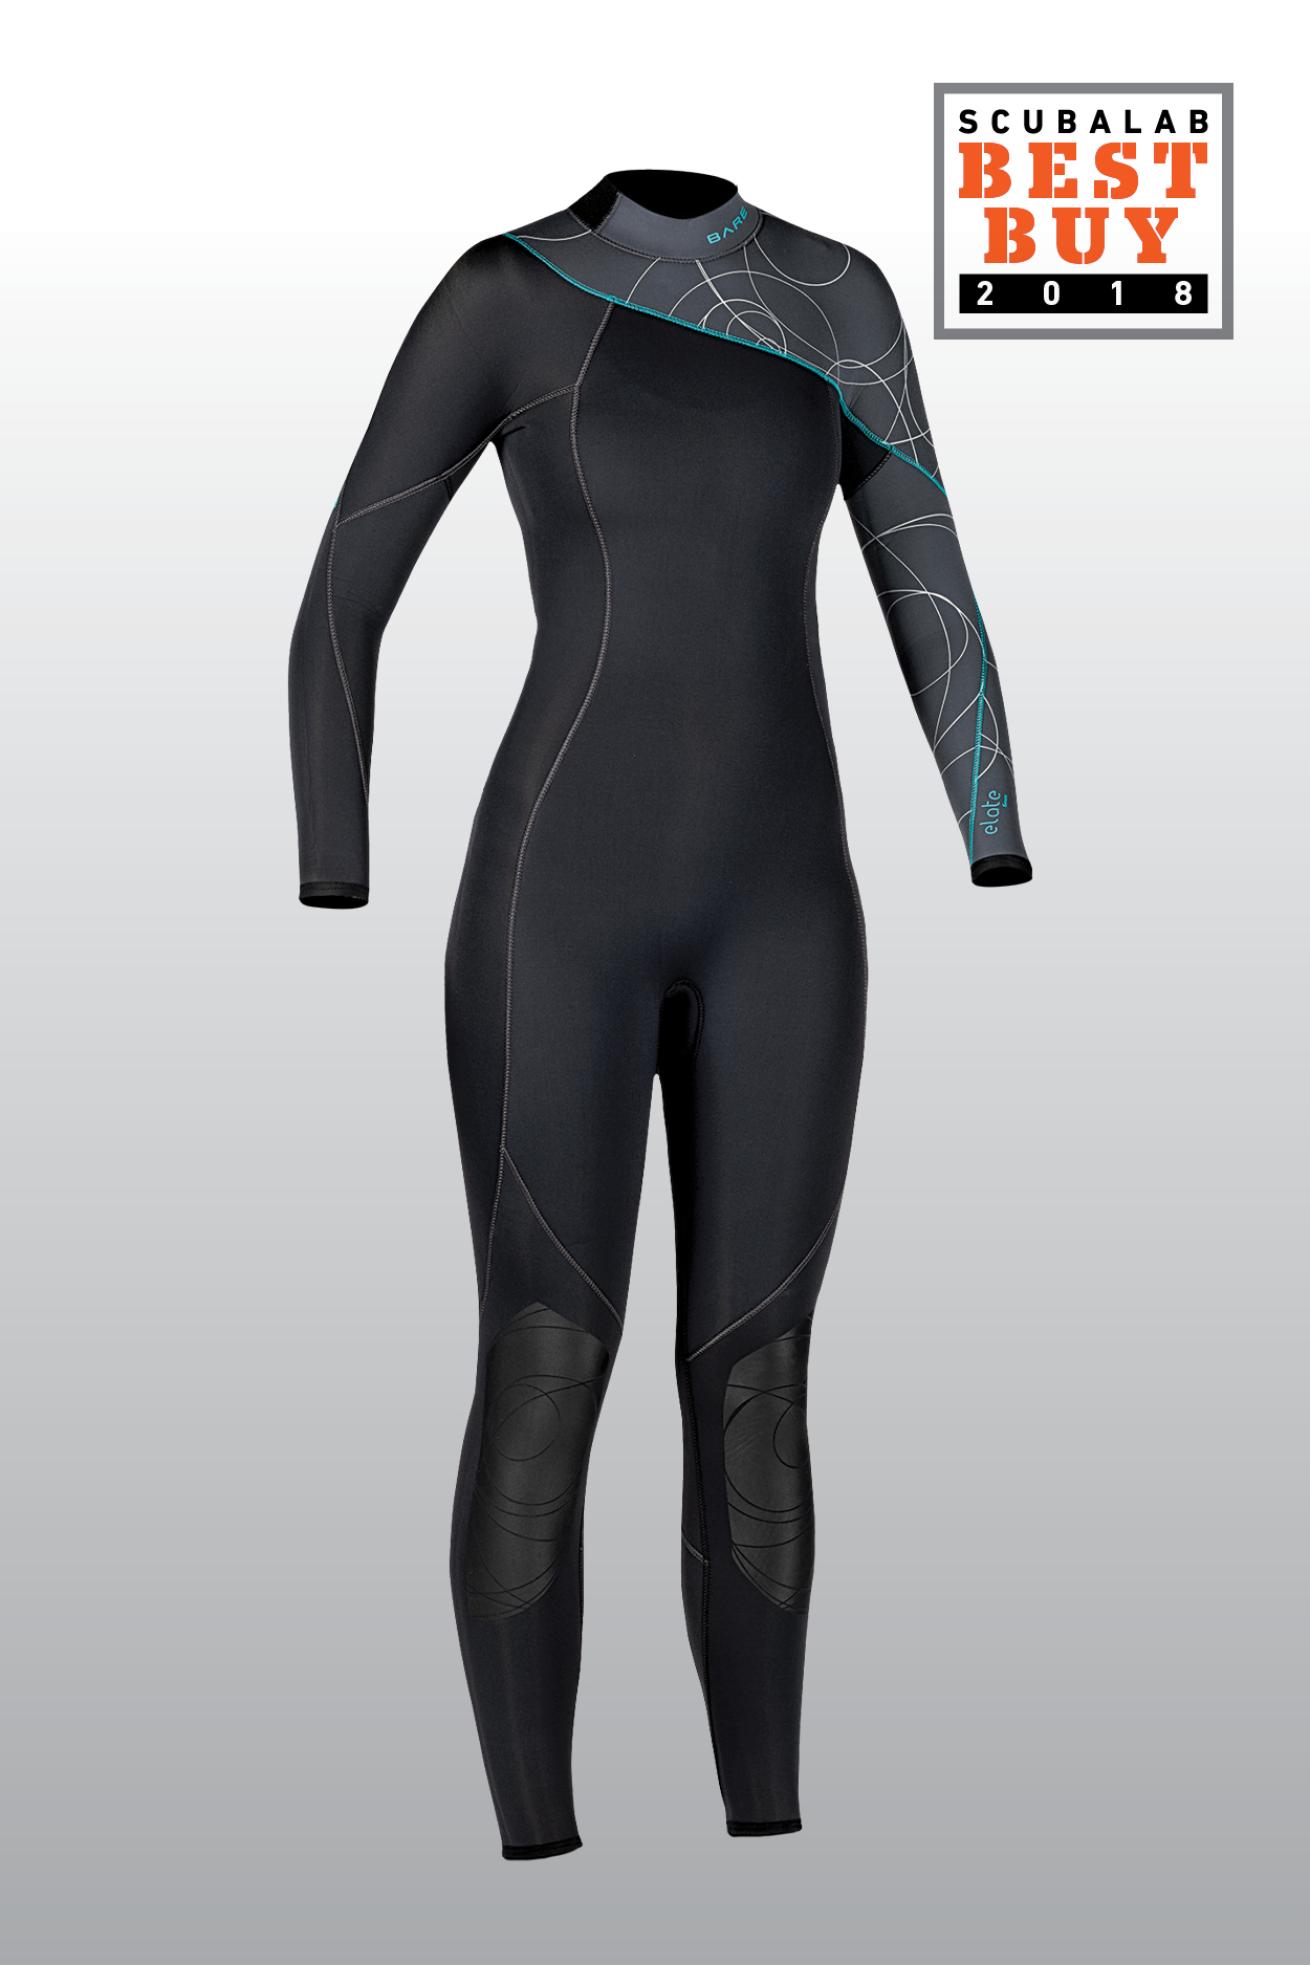 The Best 5 mm Scuba Wetsuits Reviewed by ScubaLab